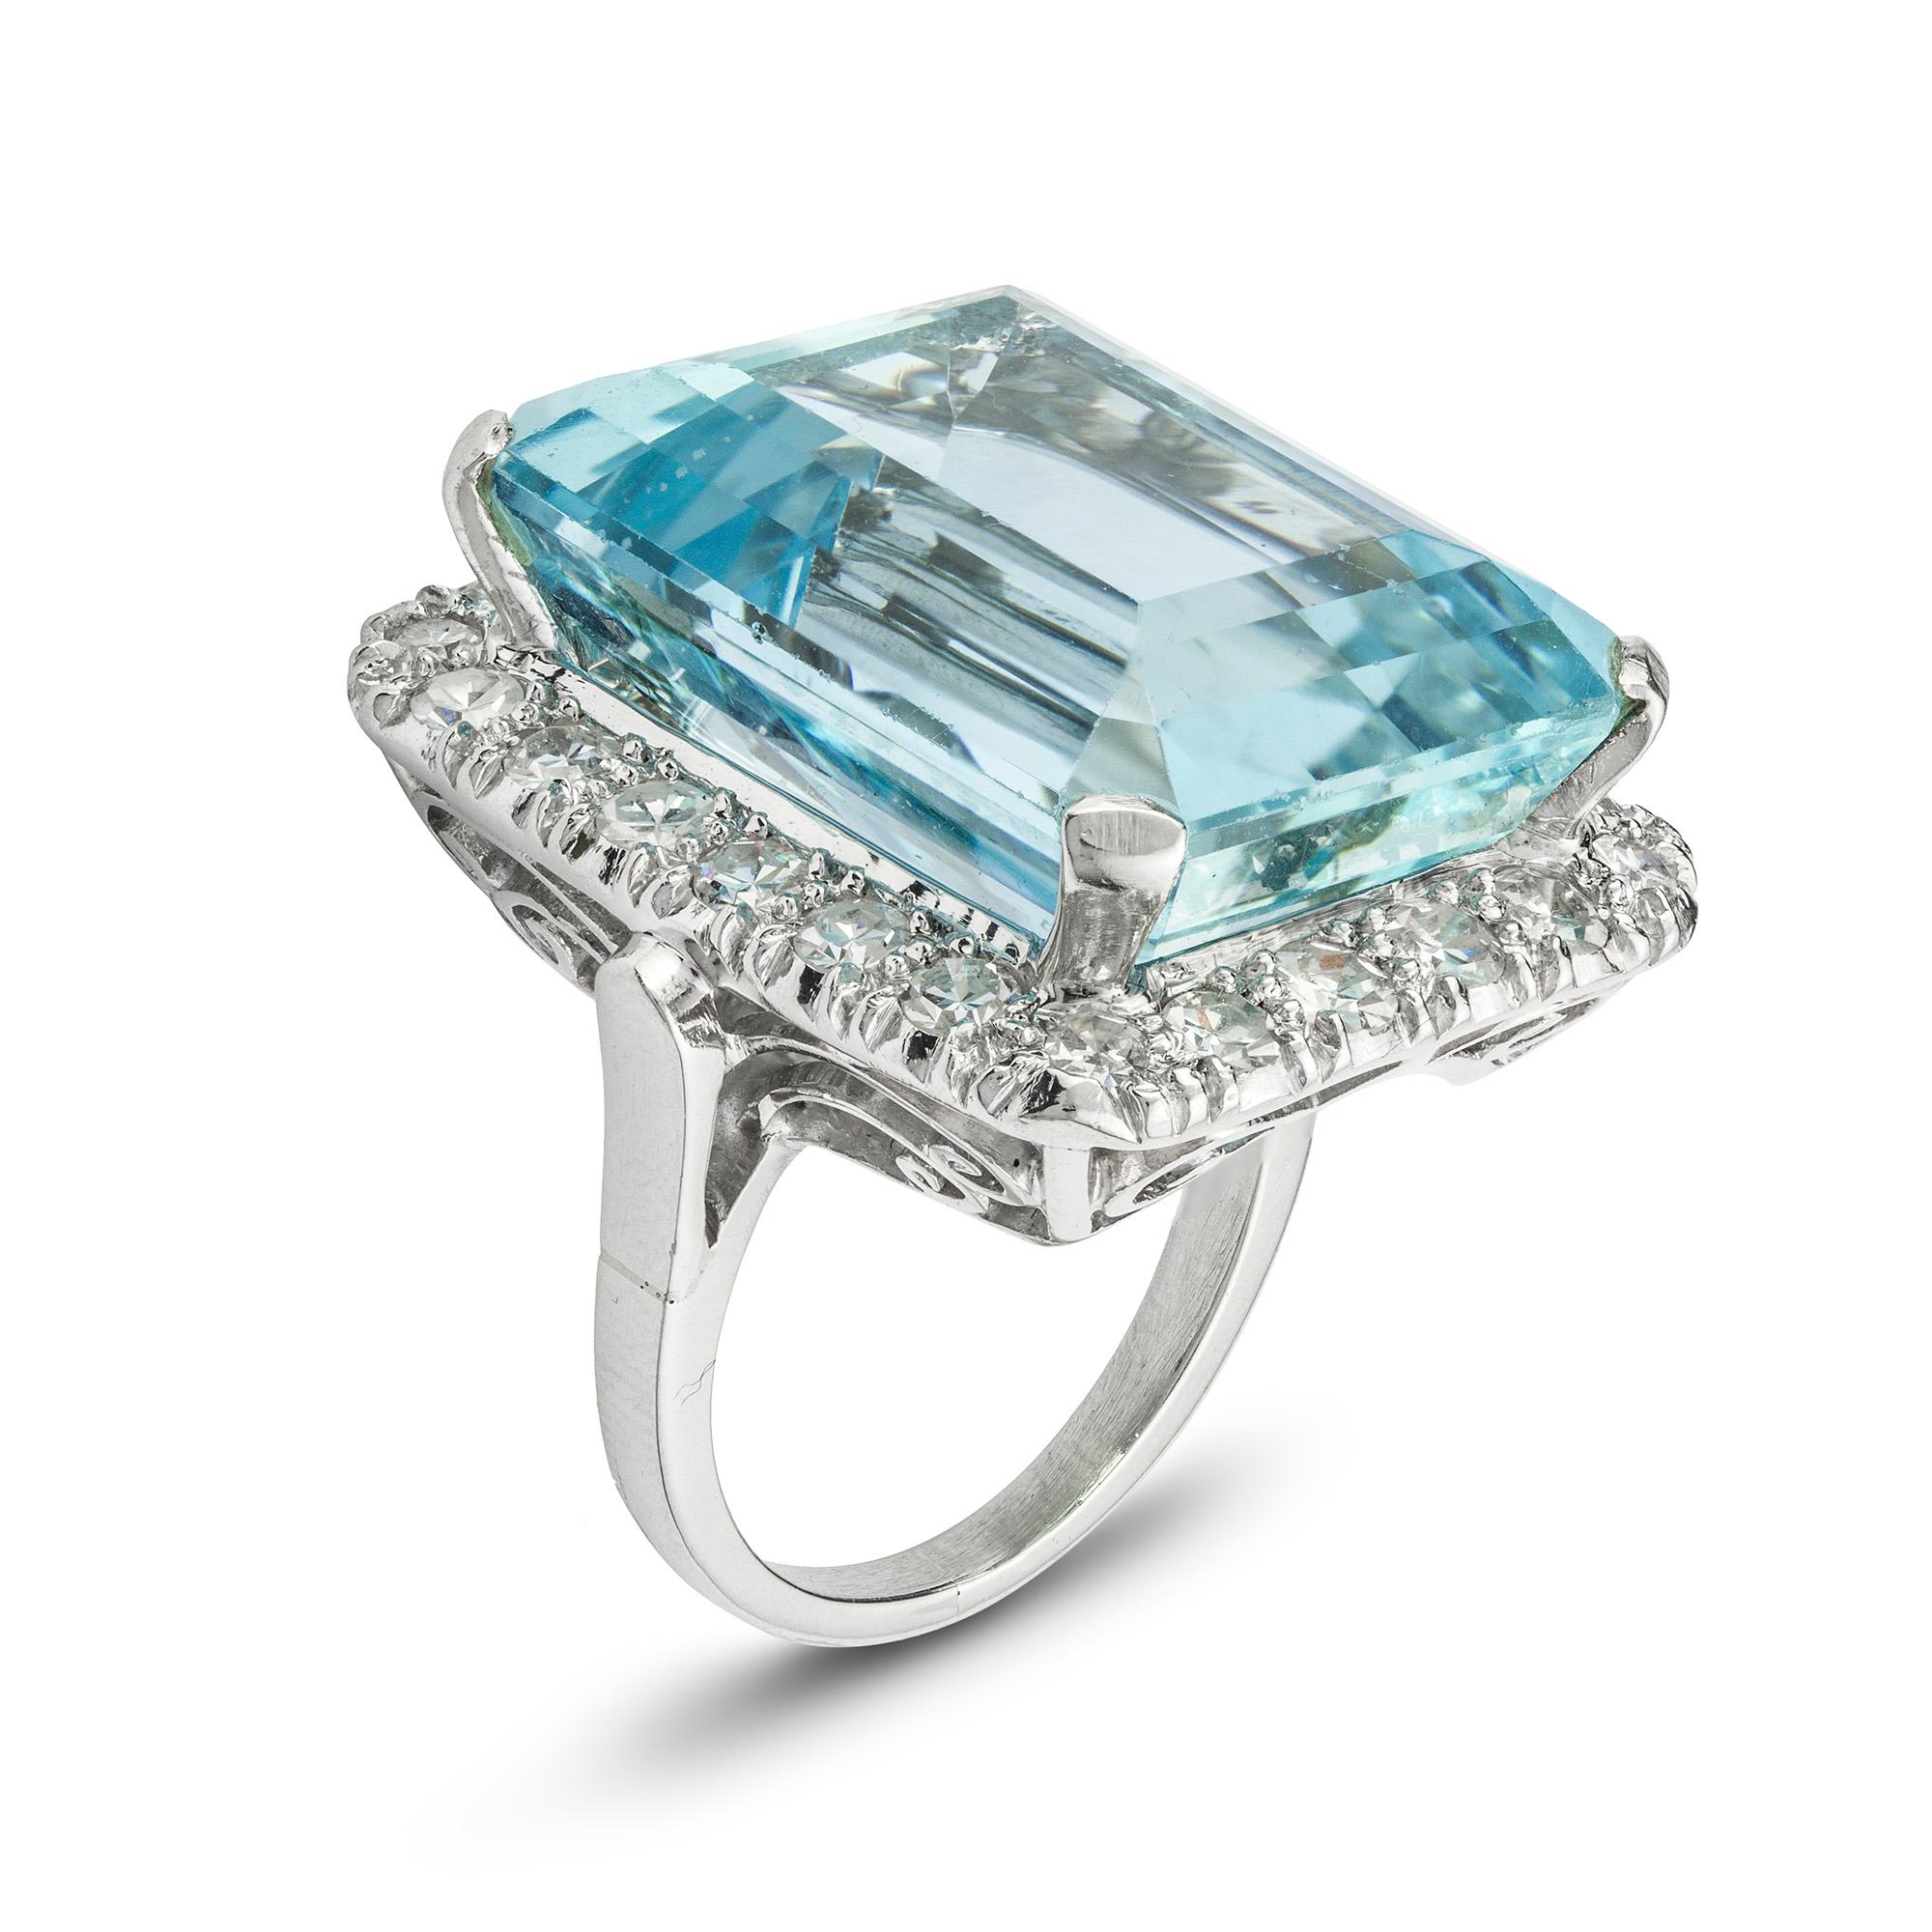 An aquamarine and diamond dress ring, the emerald-cut aquamarine measuring approximately 20.5 x 16 x 11.1mm and weighing 27.2 carats, surrounded by single-cut diamonds estimated to weigh 1.3 carats in total, all claw set to a platinum mount with